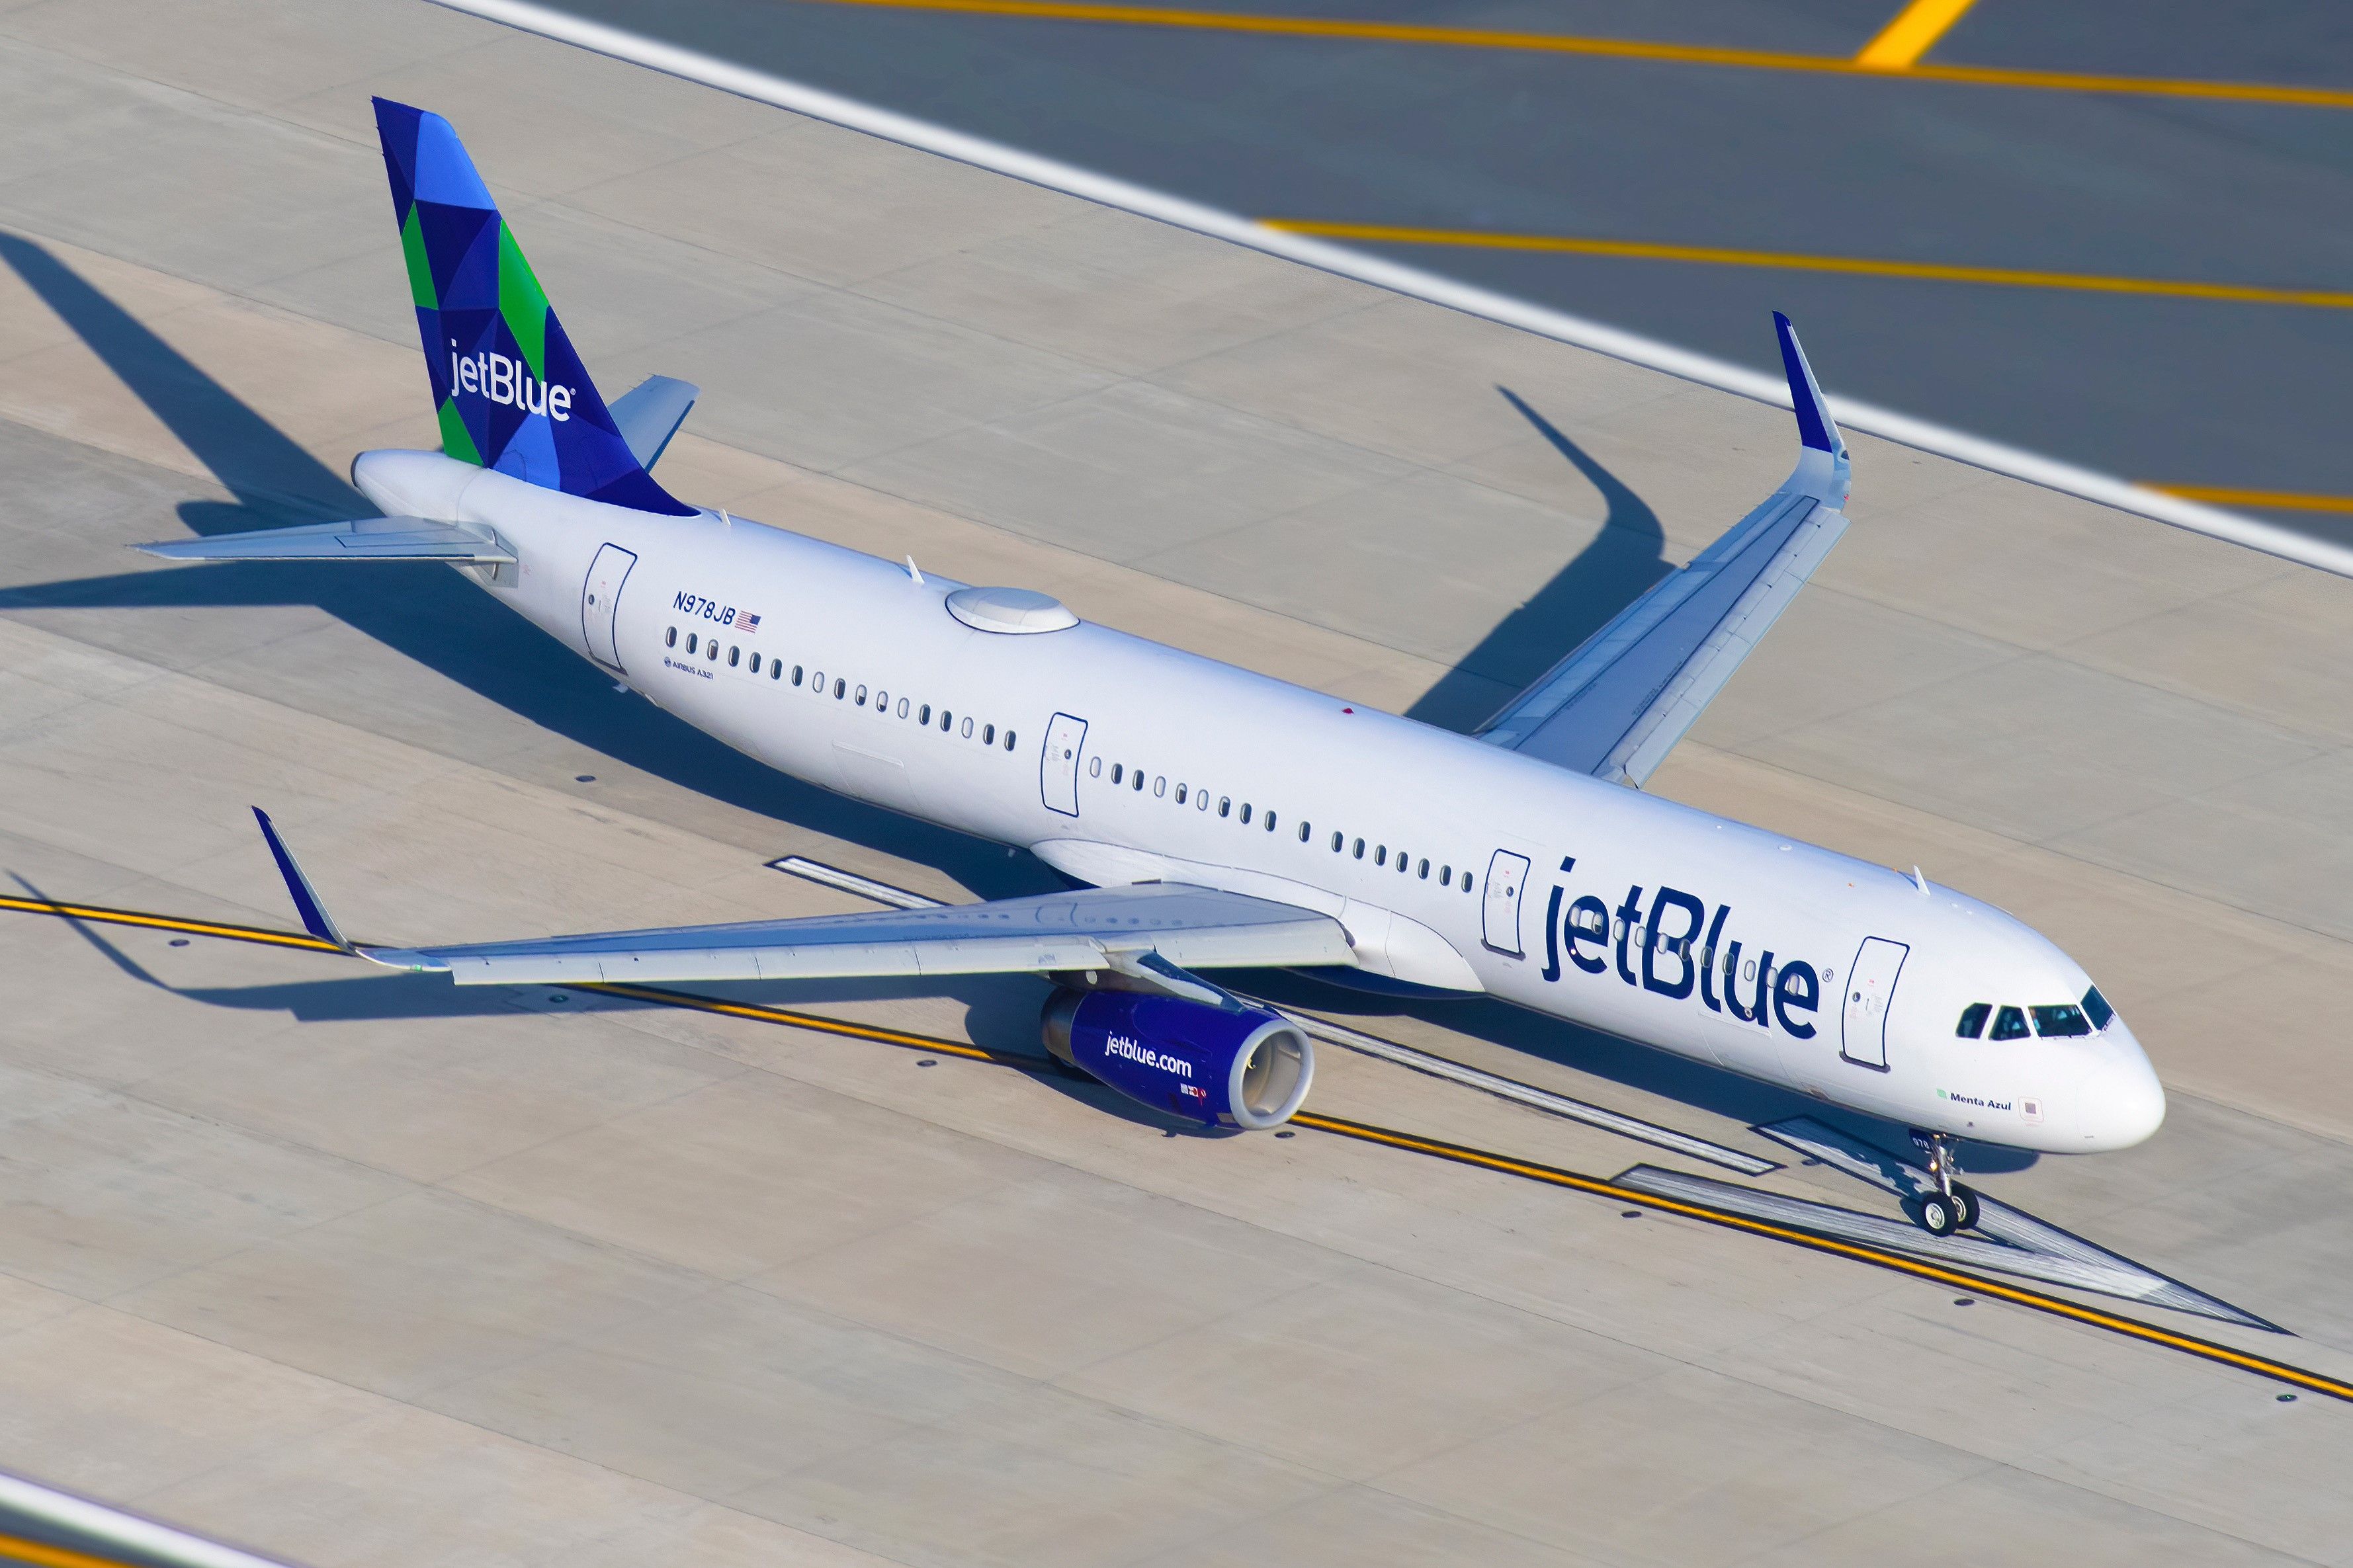 A JetBlue Airways Airbus A321-231 on an airport apron.